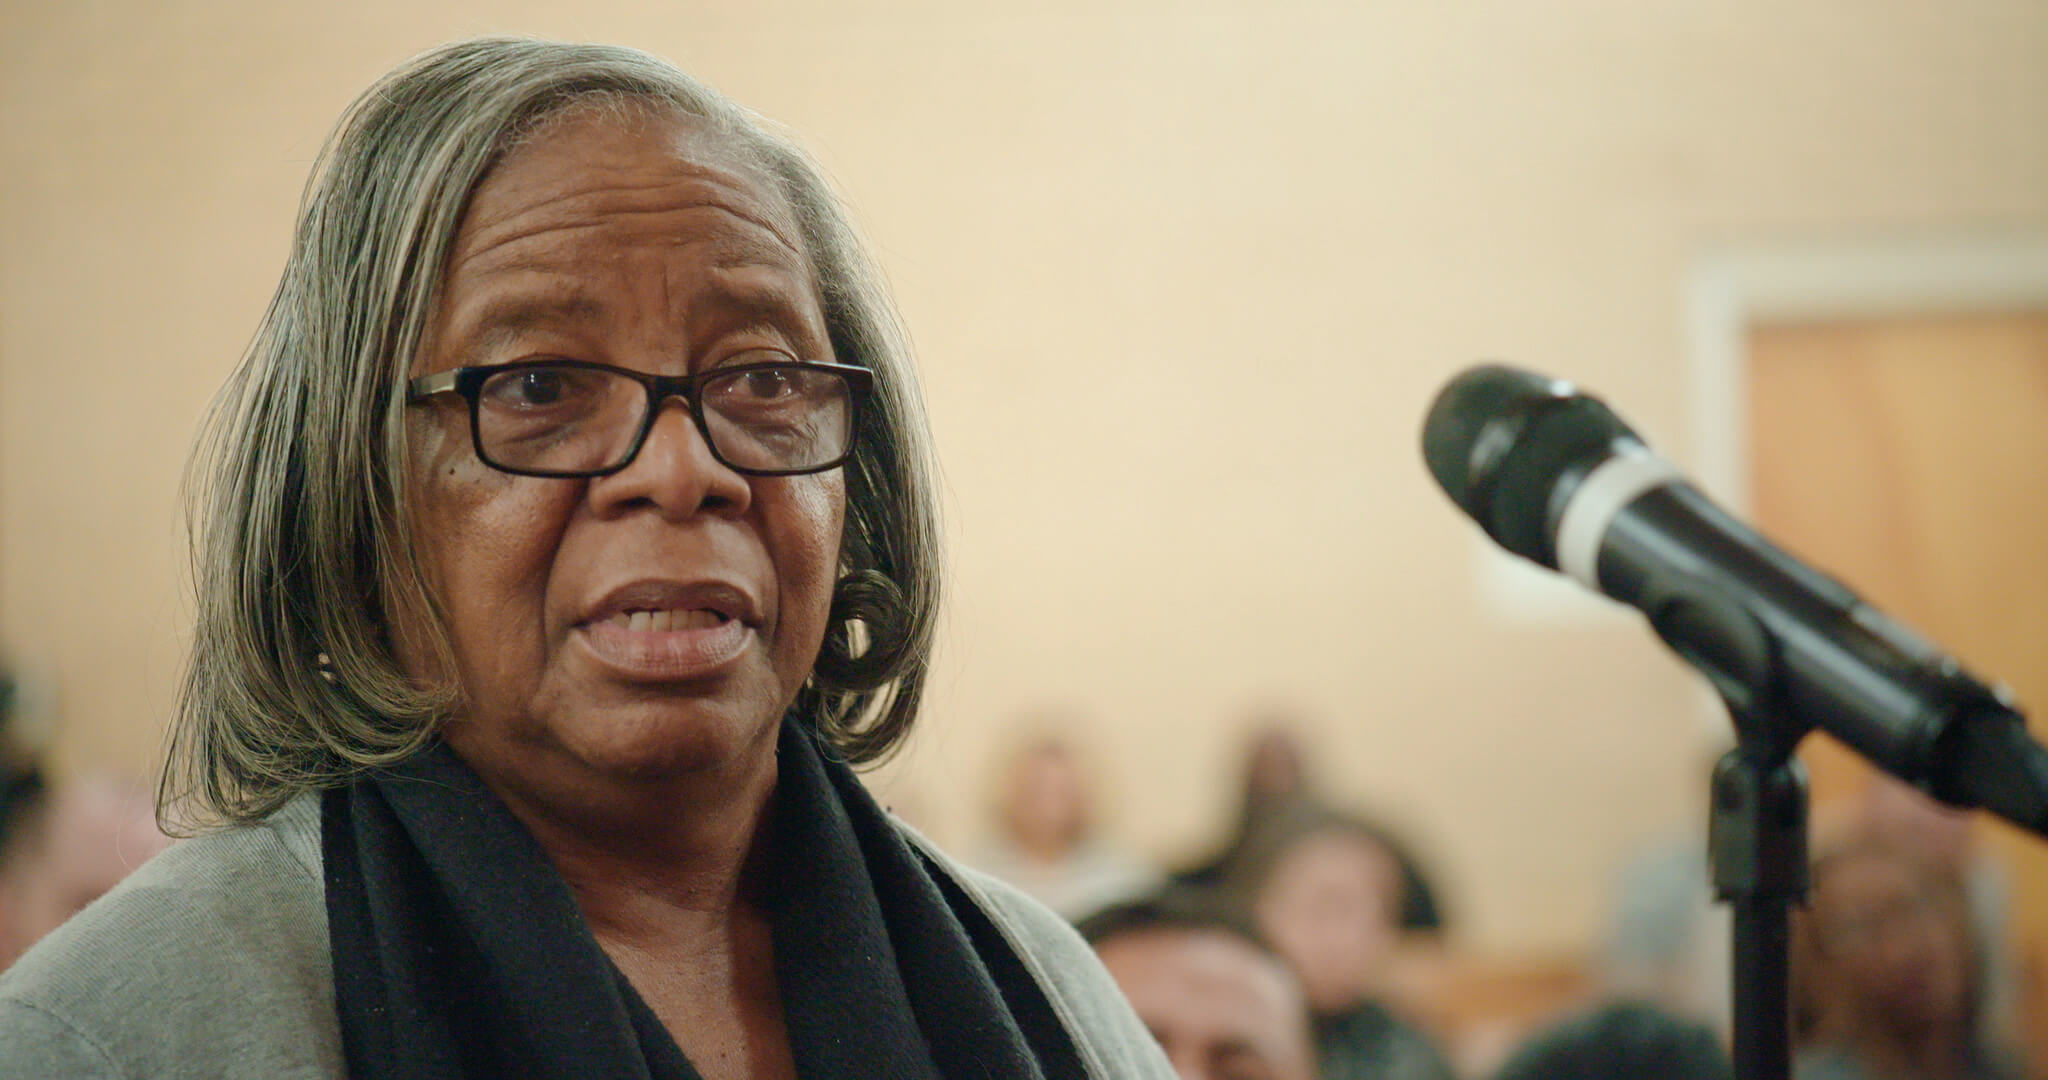 Still from I am not going to change 400 years in four. Close-up of a woman talking in front of a microphone. She has medium-length gray hair, and wears a black scarf and a gray shirt.